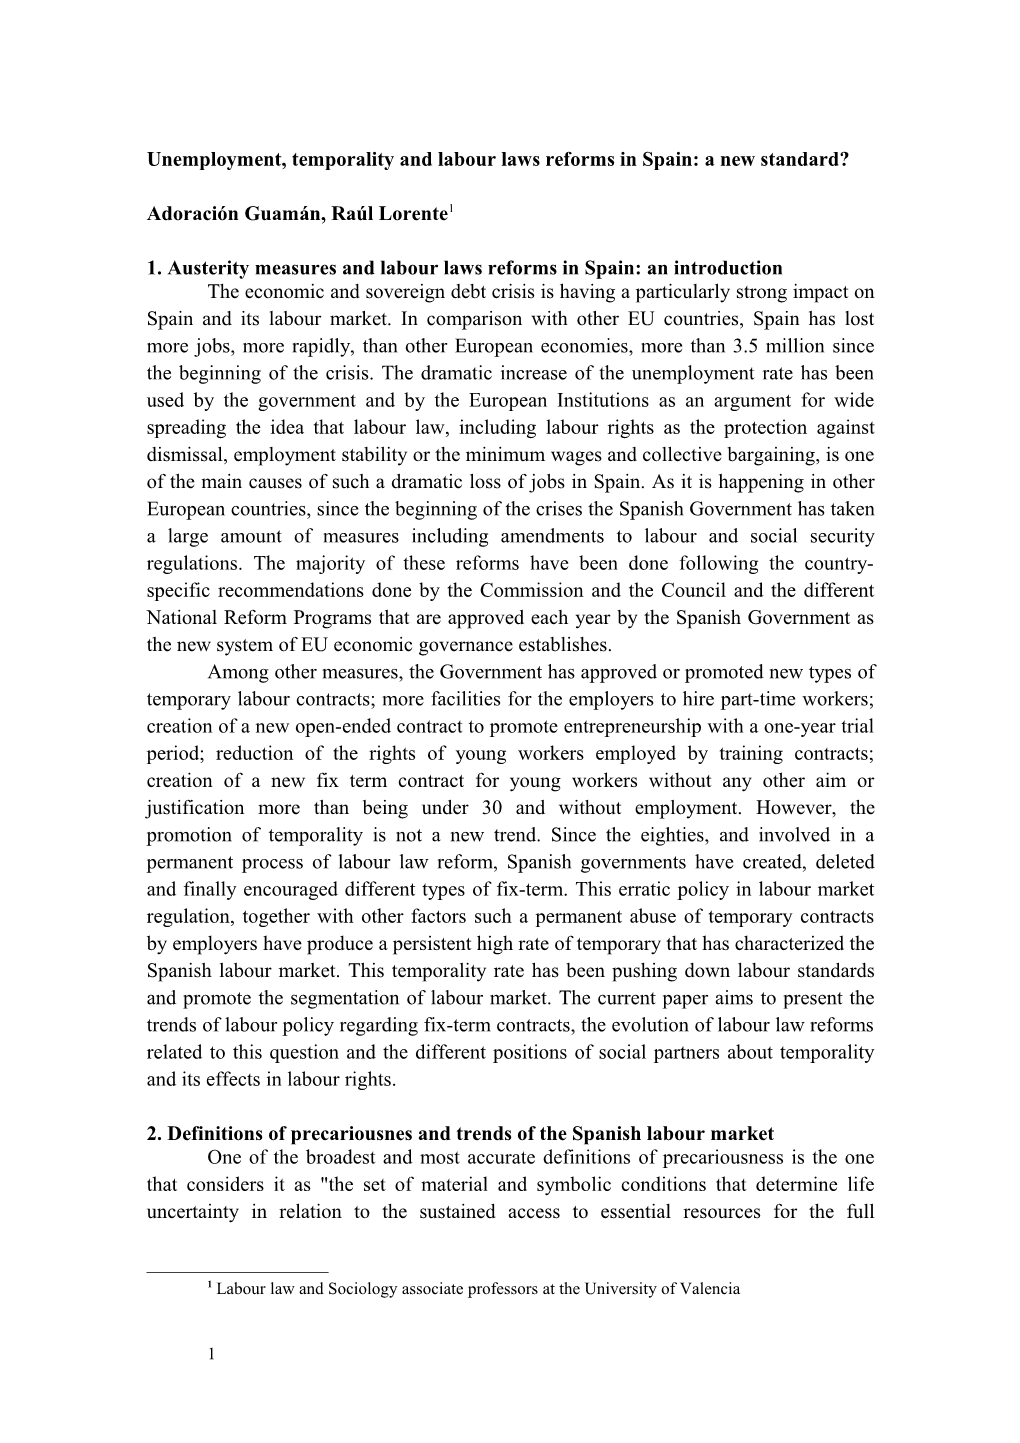 Unemployment, Temporality and Labour Laws Reforms in Spain: a New Standard?